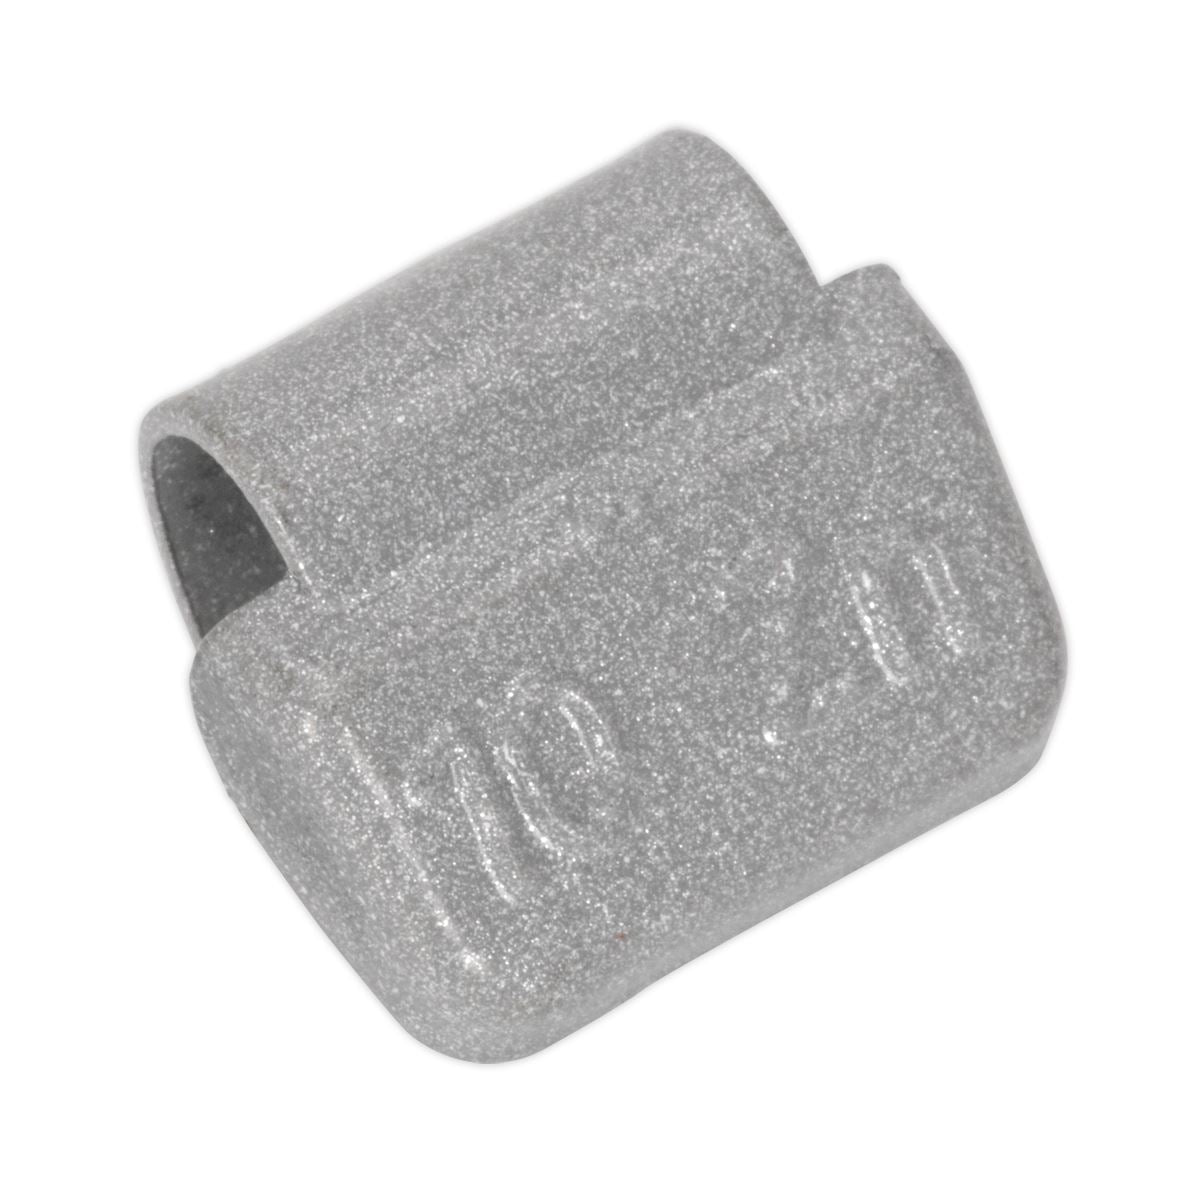 Sealey Wheel Weight 10g Hammer-On Plastic Coated Zinc for Alloy Wheels Pack of 100